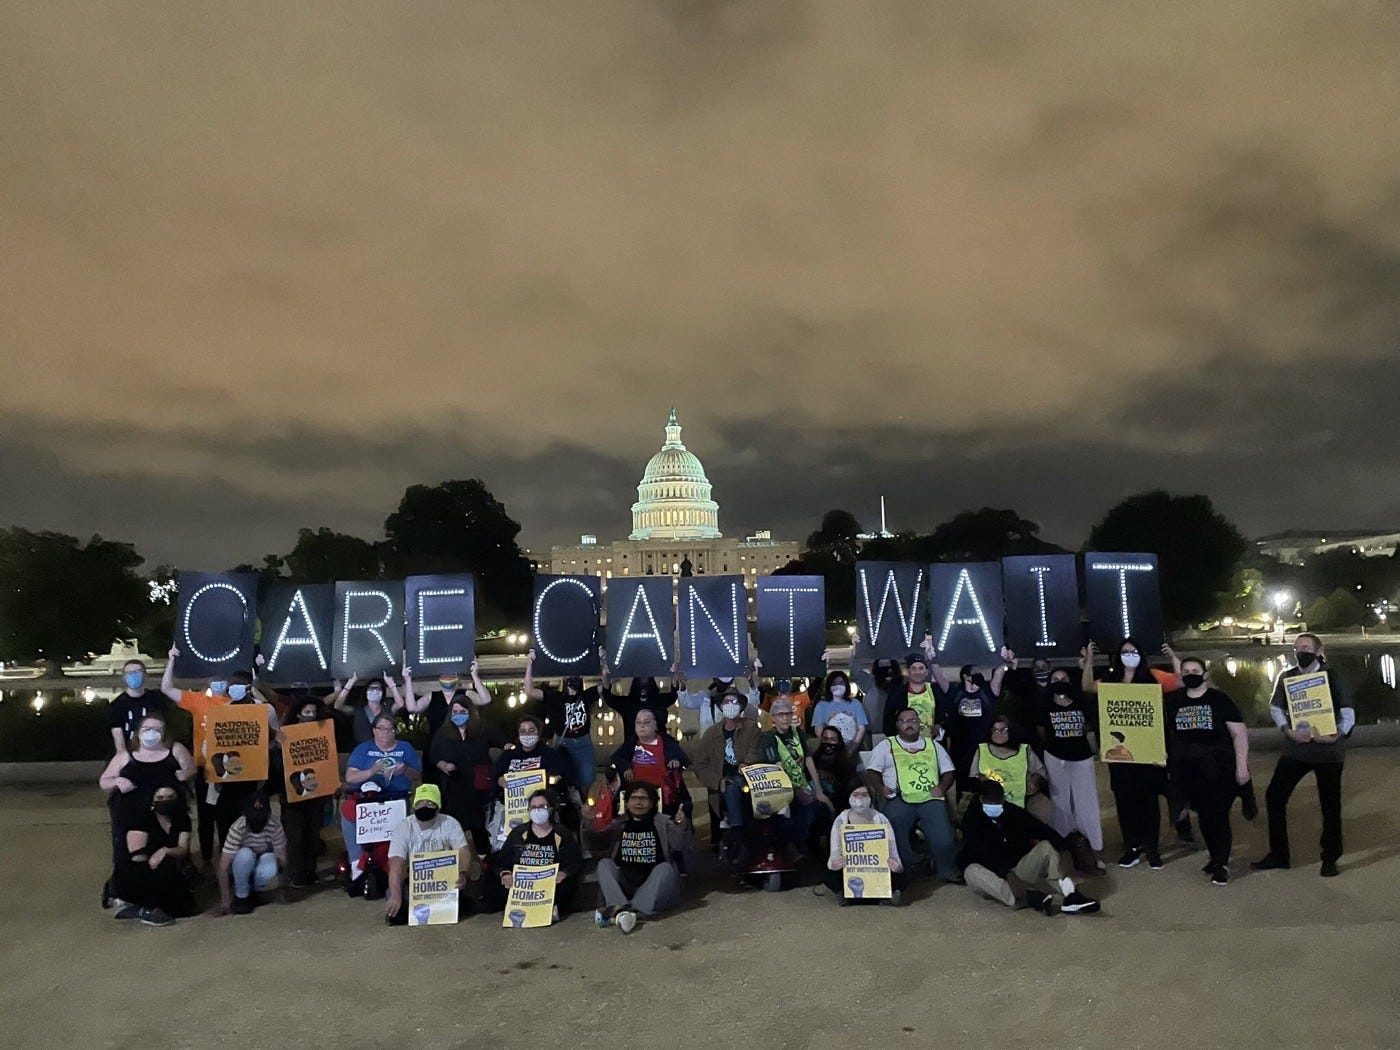 About 30 activists gather under a cloudy night sky with the U.S. Capitol building behind them. They carry many signs too small to read, but several signs in large illuminated letters read CARE CANT WAIT.